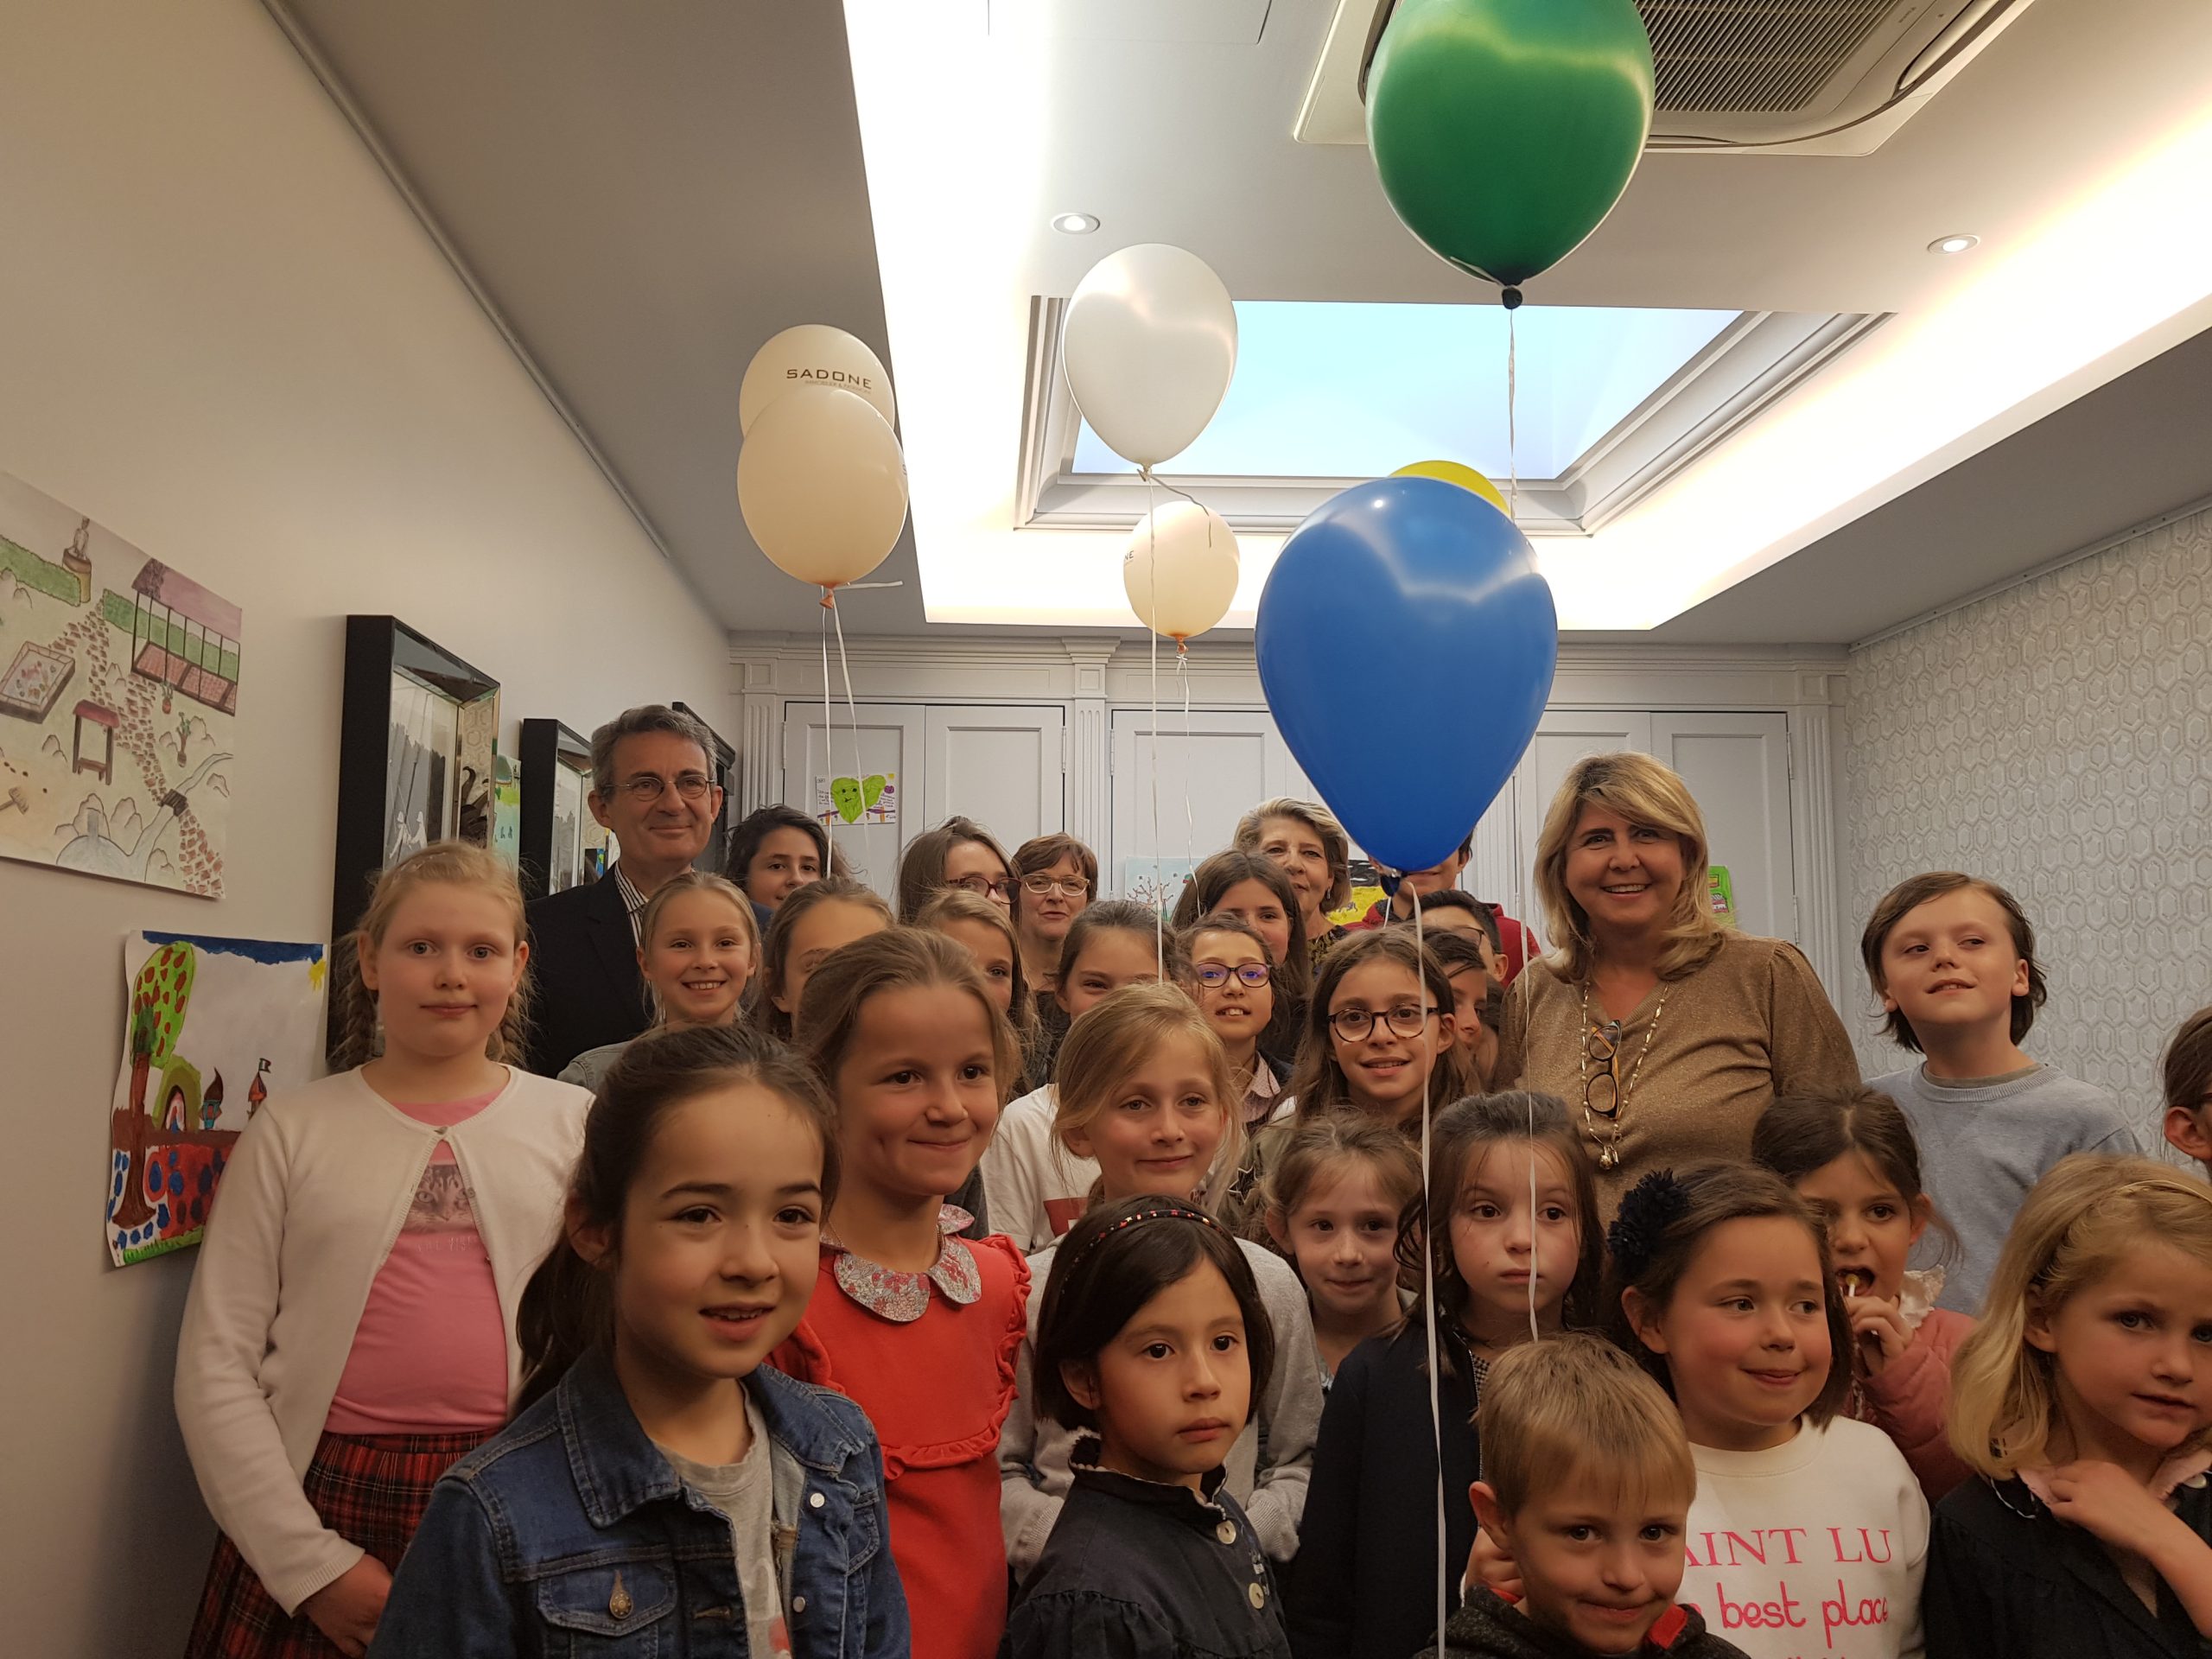 enfants concours dessin 2019 neuilly